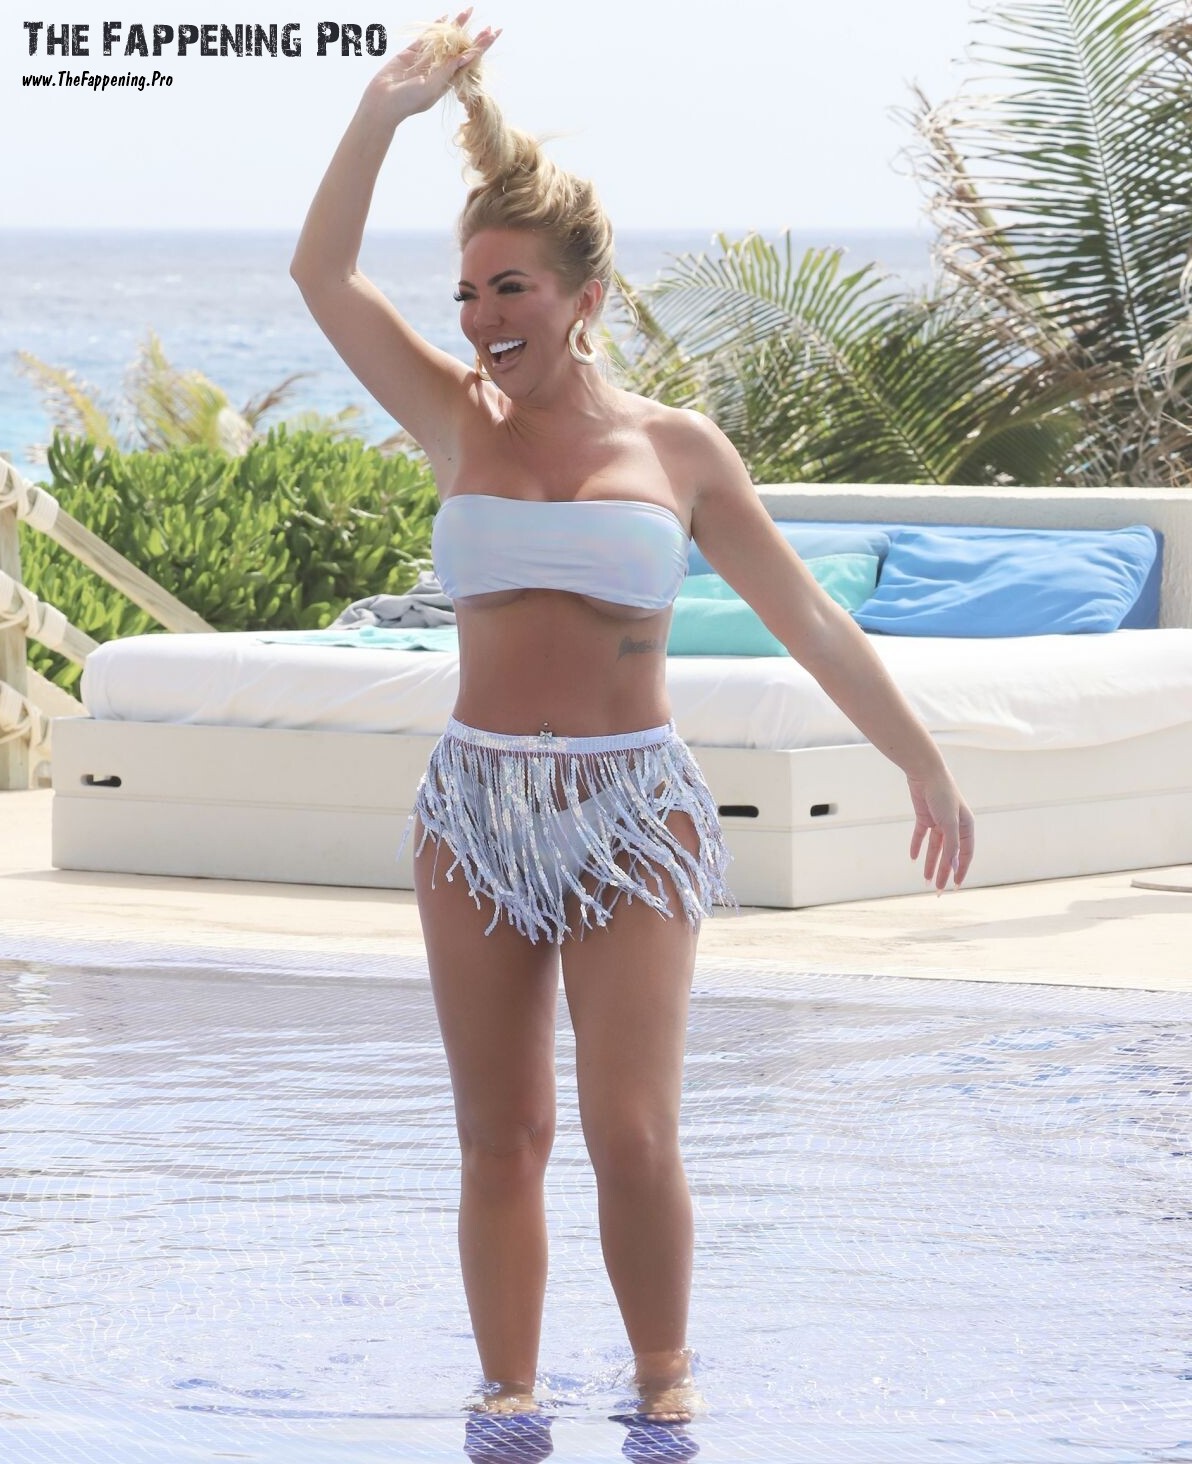 Get ready for some serious poolside glamour as British TV star Aisleyne Horgan-Wallace sizzles in a barely-there bikini in Cancun, Mexico. Paparazzi shots captured her stunning figure and left fans in awe. Don't miss out on this hot and daring look that has everyone talking!